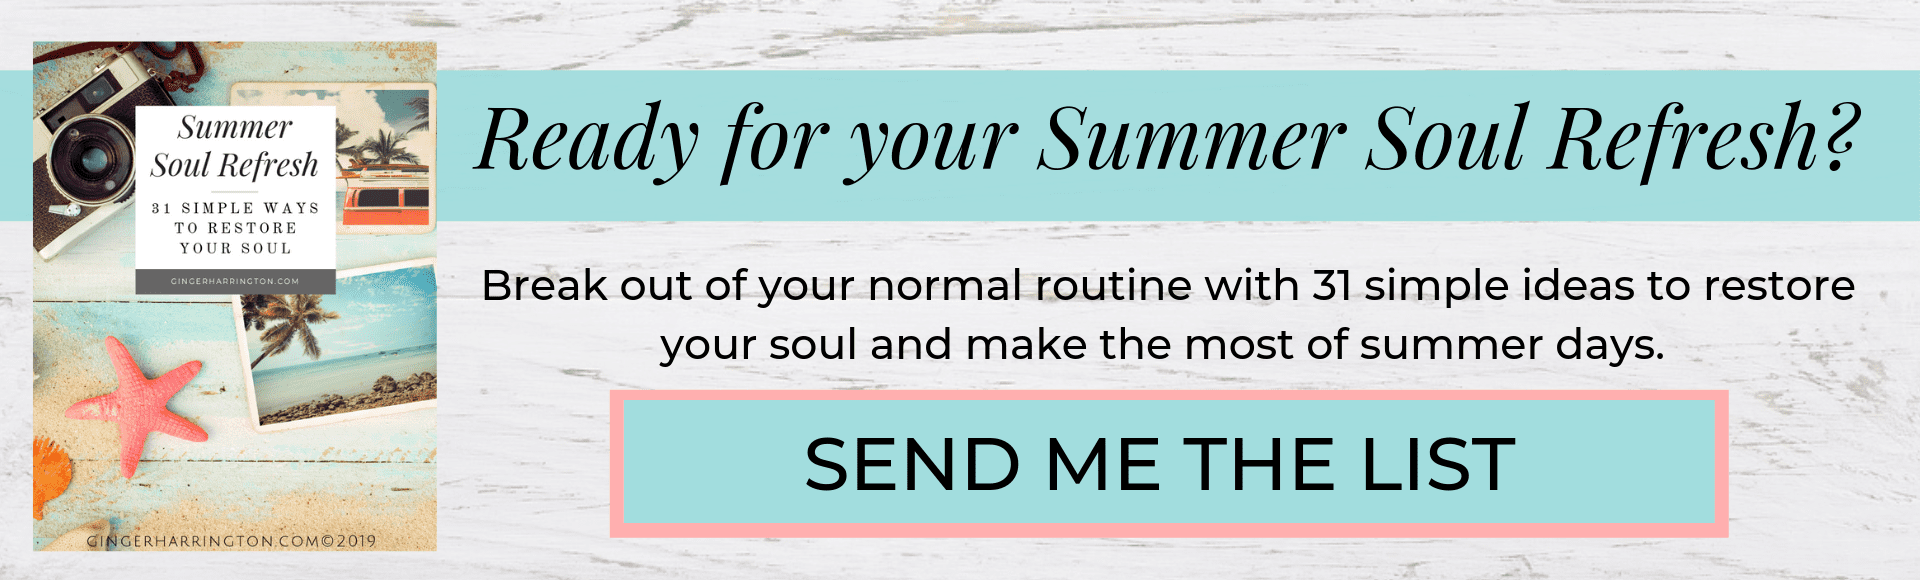 Cover copy of eBook called Summer Soul Refresh: 31 Simple Ways to Restore Your Soul.